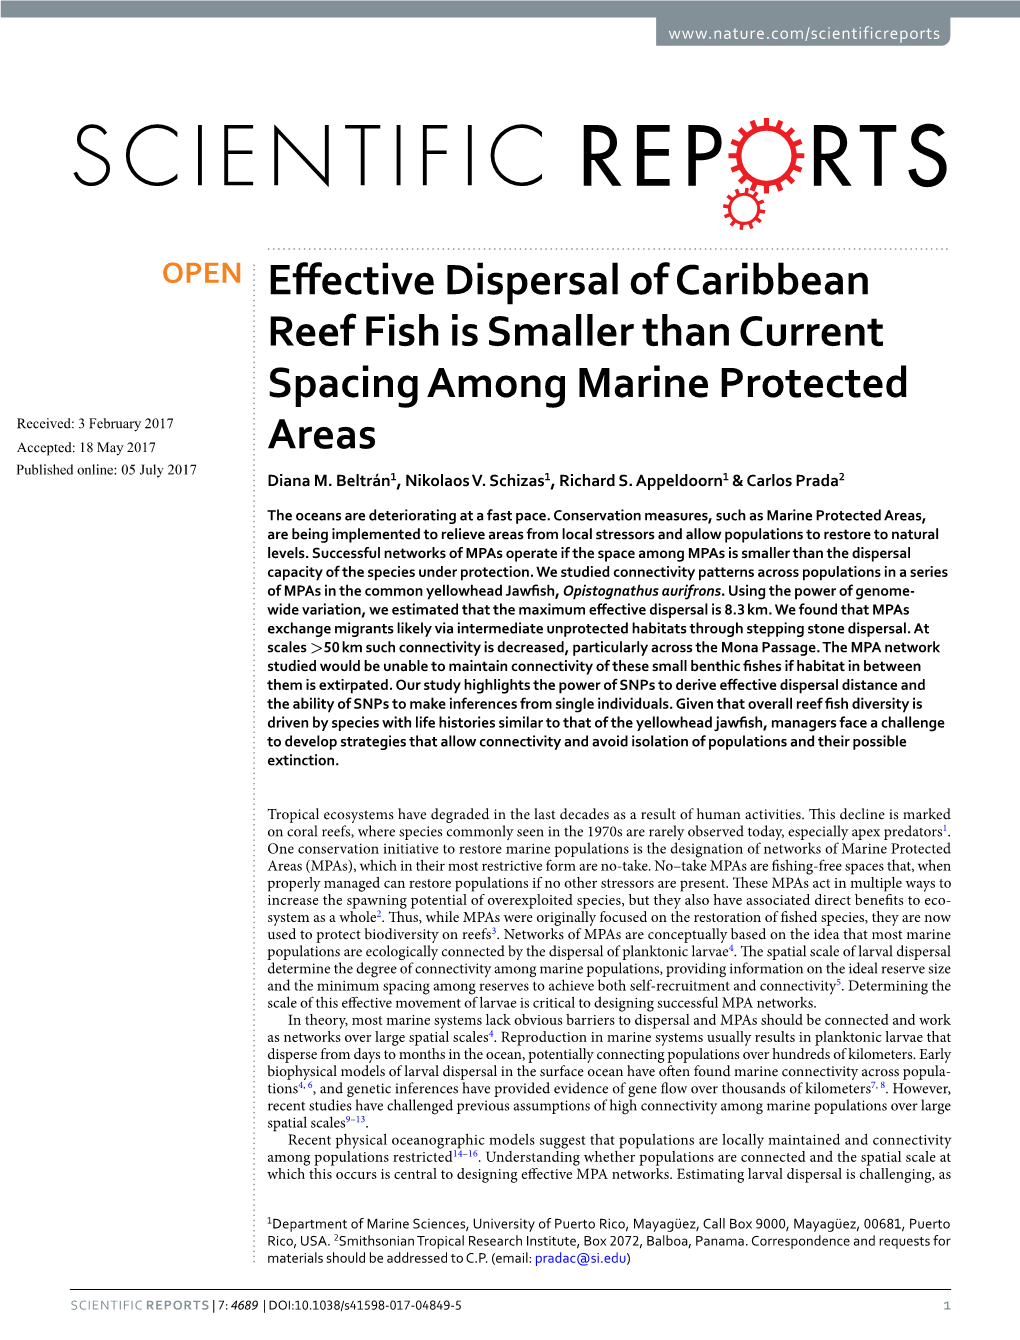 Effective Dispersal of Caribbean Reef Fish Is Smaller Than Current